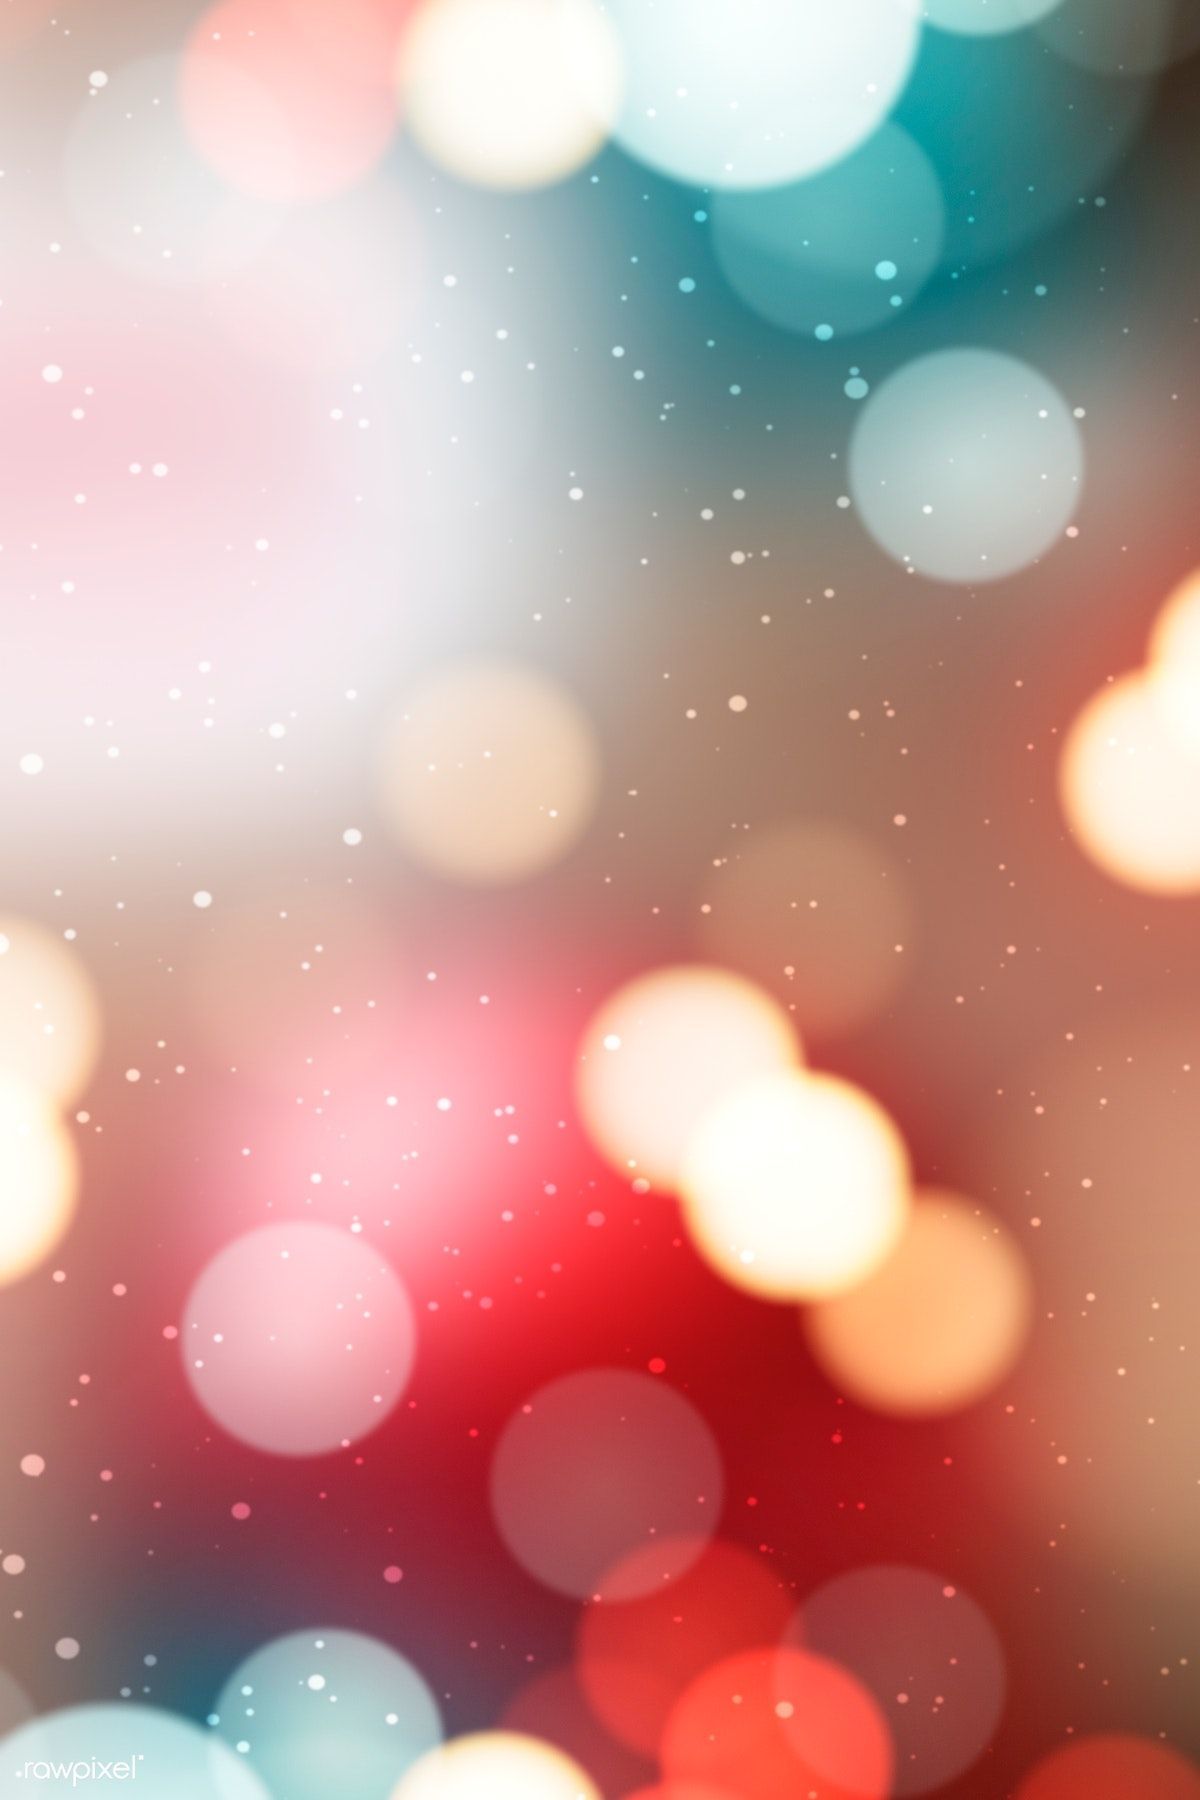 Download premium image of Blurry colorful Christmas bokeh light background - Download premium image of Blurry colorful Christmas bokeh light background -   17 beauty Background light ideas